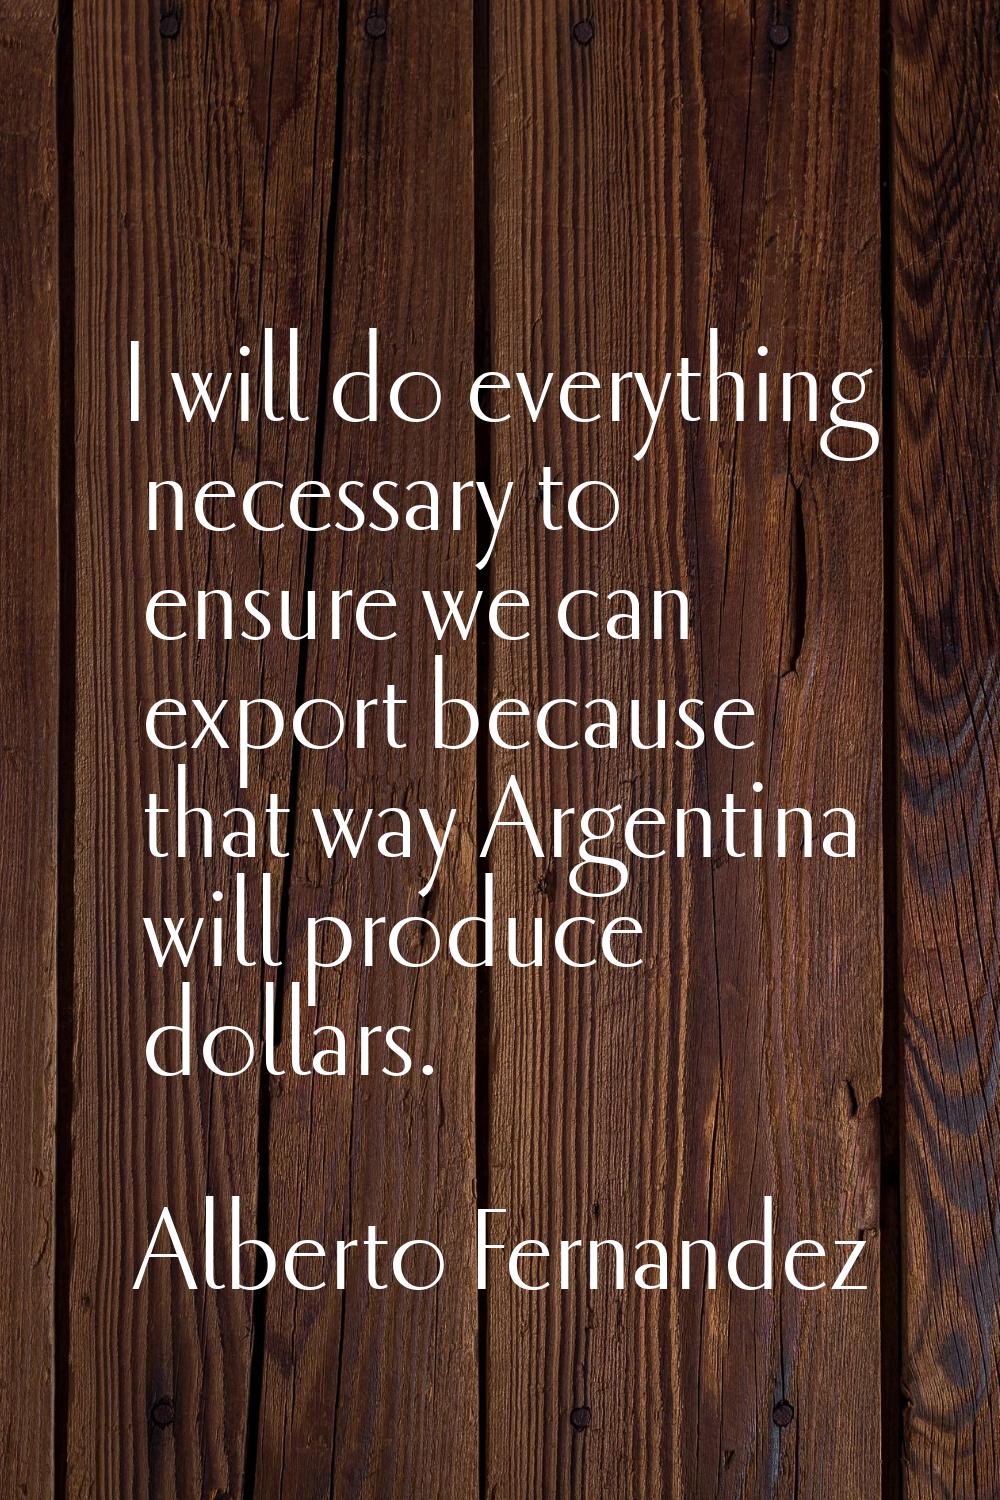 I will do everything necessary to ensure we can export because that way Argentina will produce doll